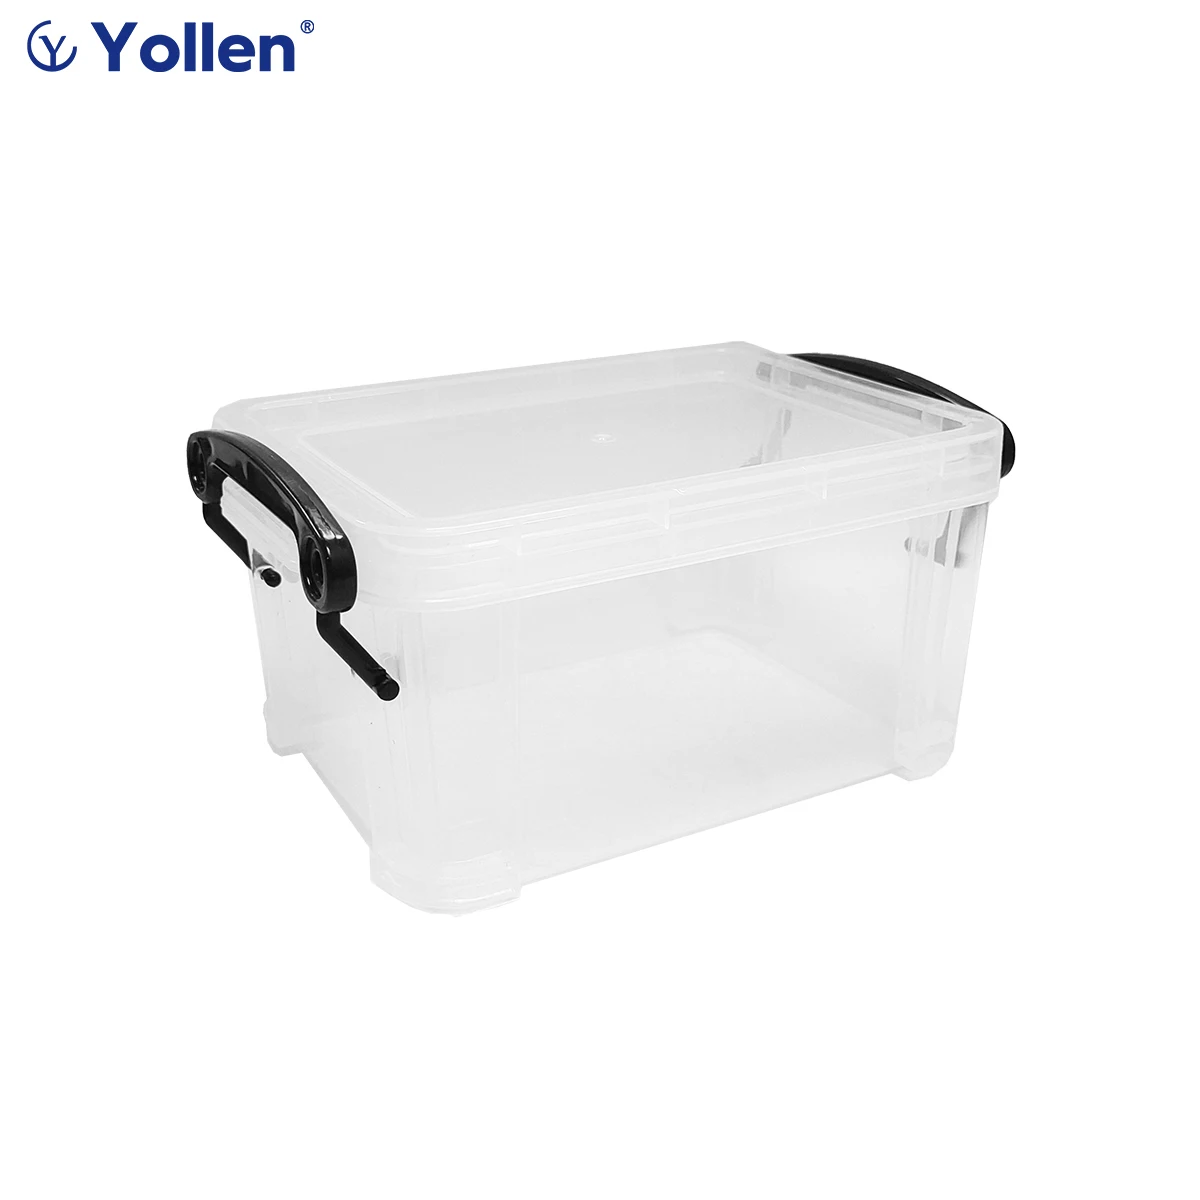 

【Storage box】1L volume 140*77*100mm transparency storage basket lucency with handle and cover